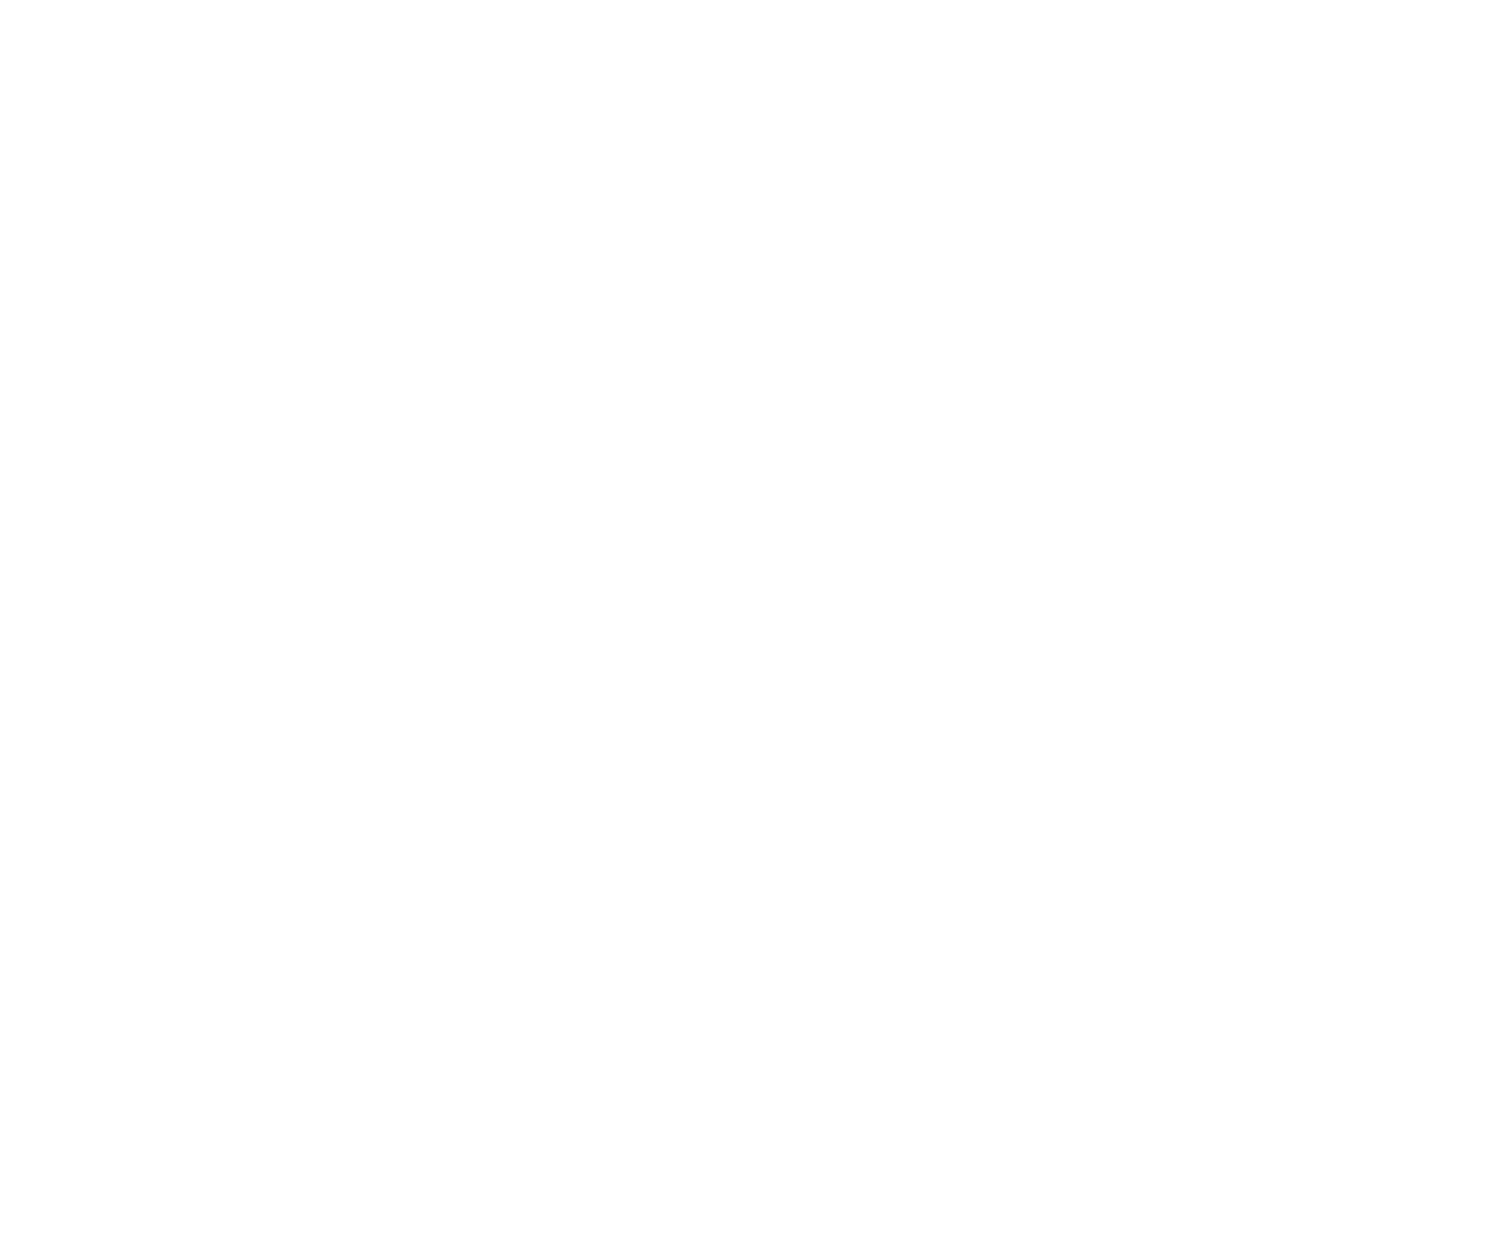 Island Home Finishes